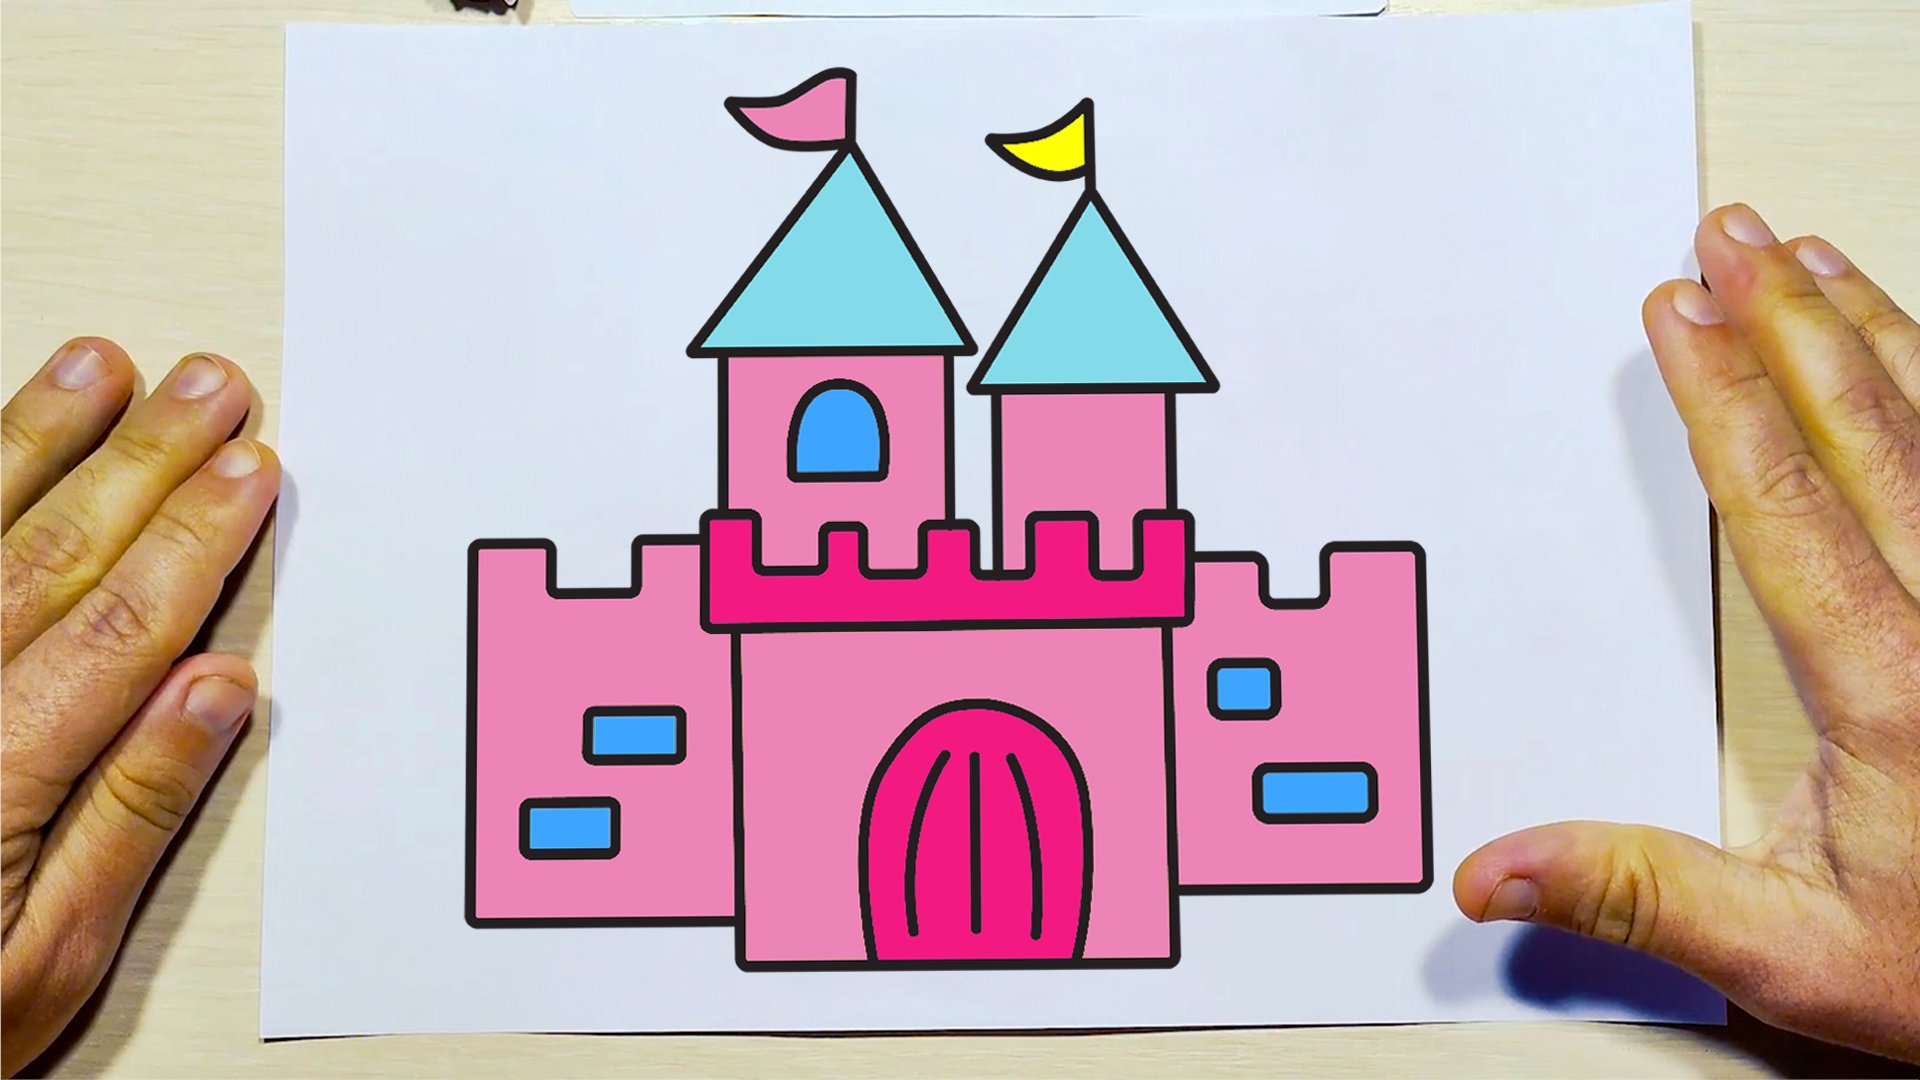 STABILO Painting and drawing for kids - inspiration | STABILO